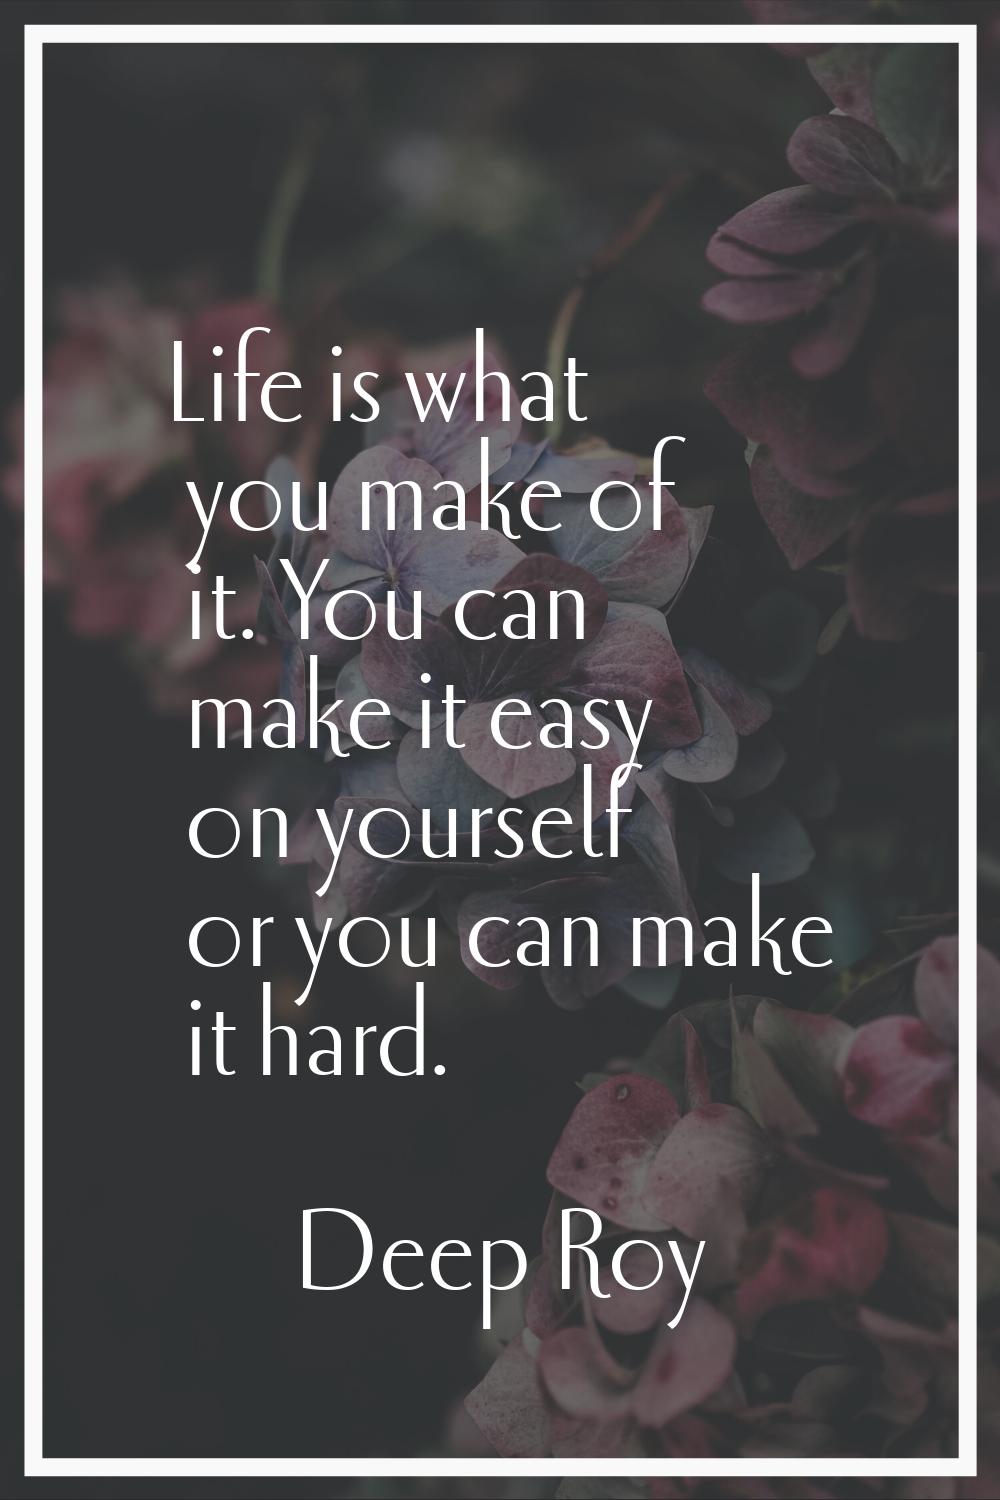 Life is what you make of it. You can make it easy on yourself or you can make it hard.